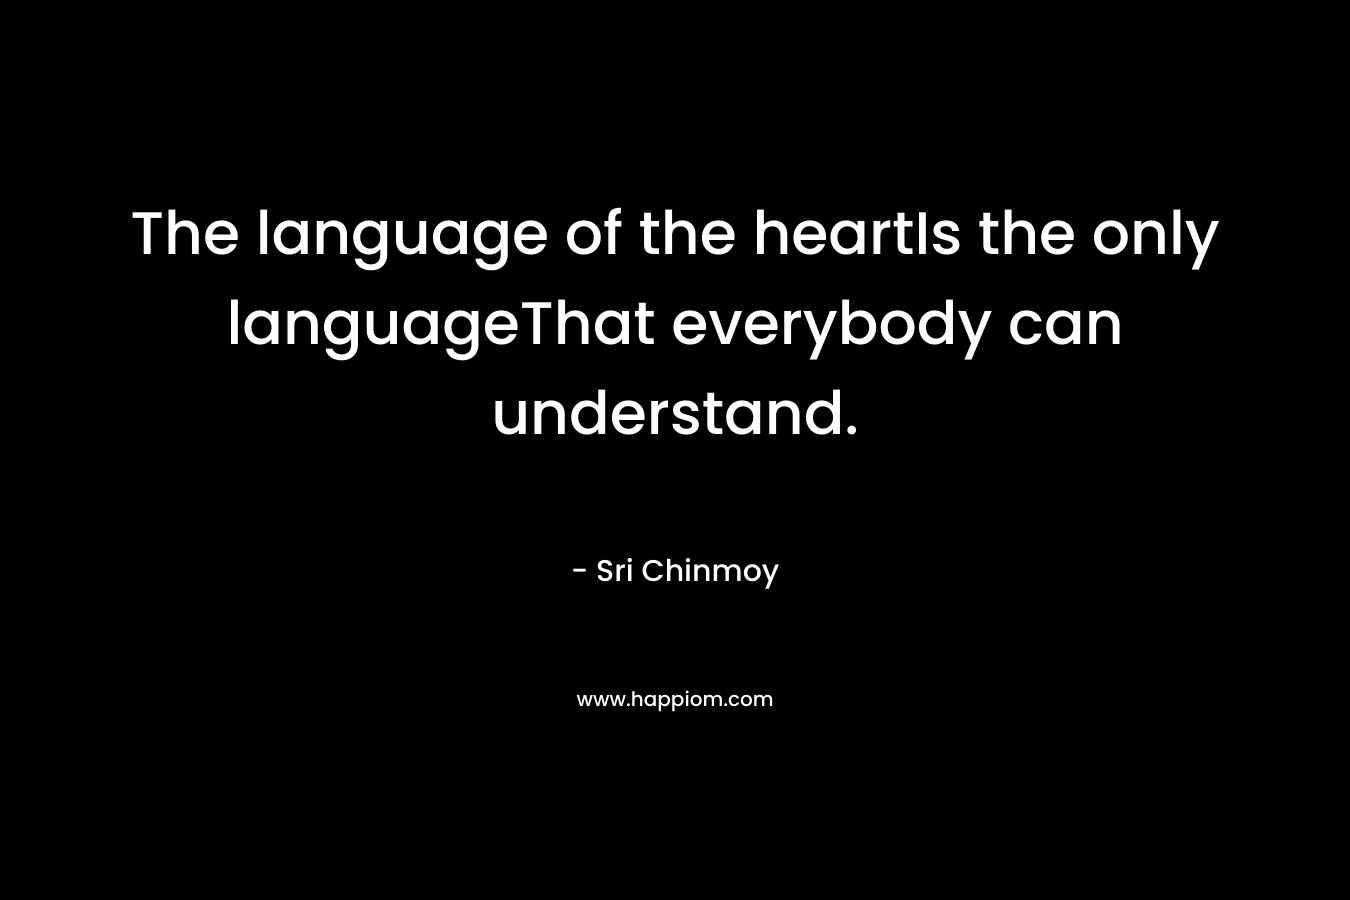 The language of the heartIs the only languageThat everybody can understand. – Sri Chinmoy